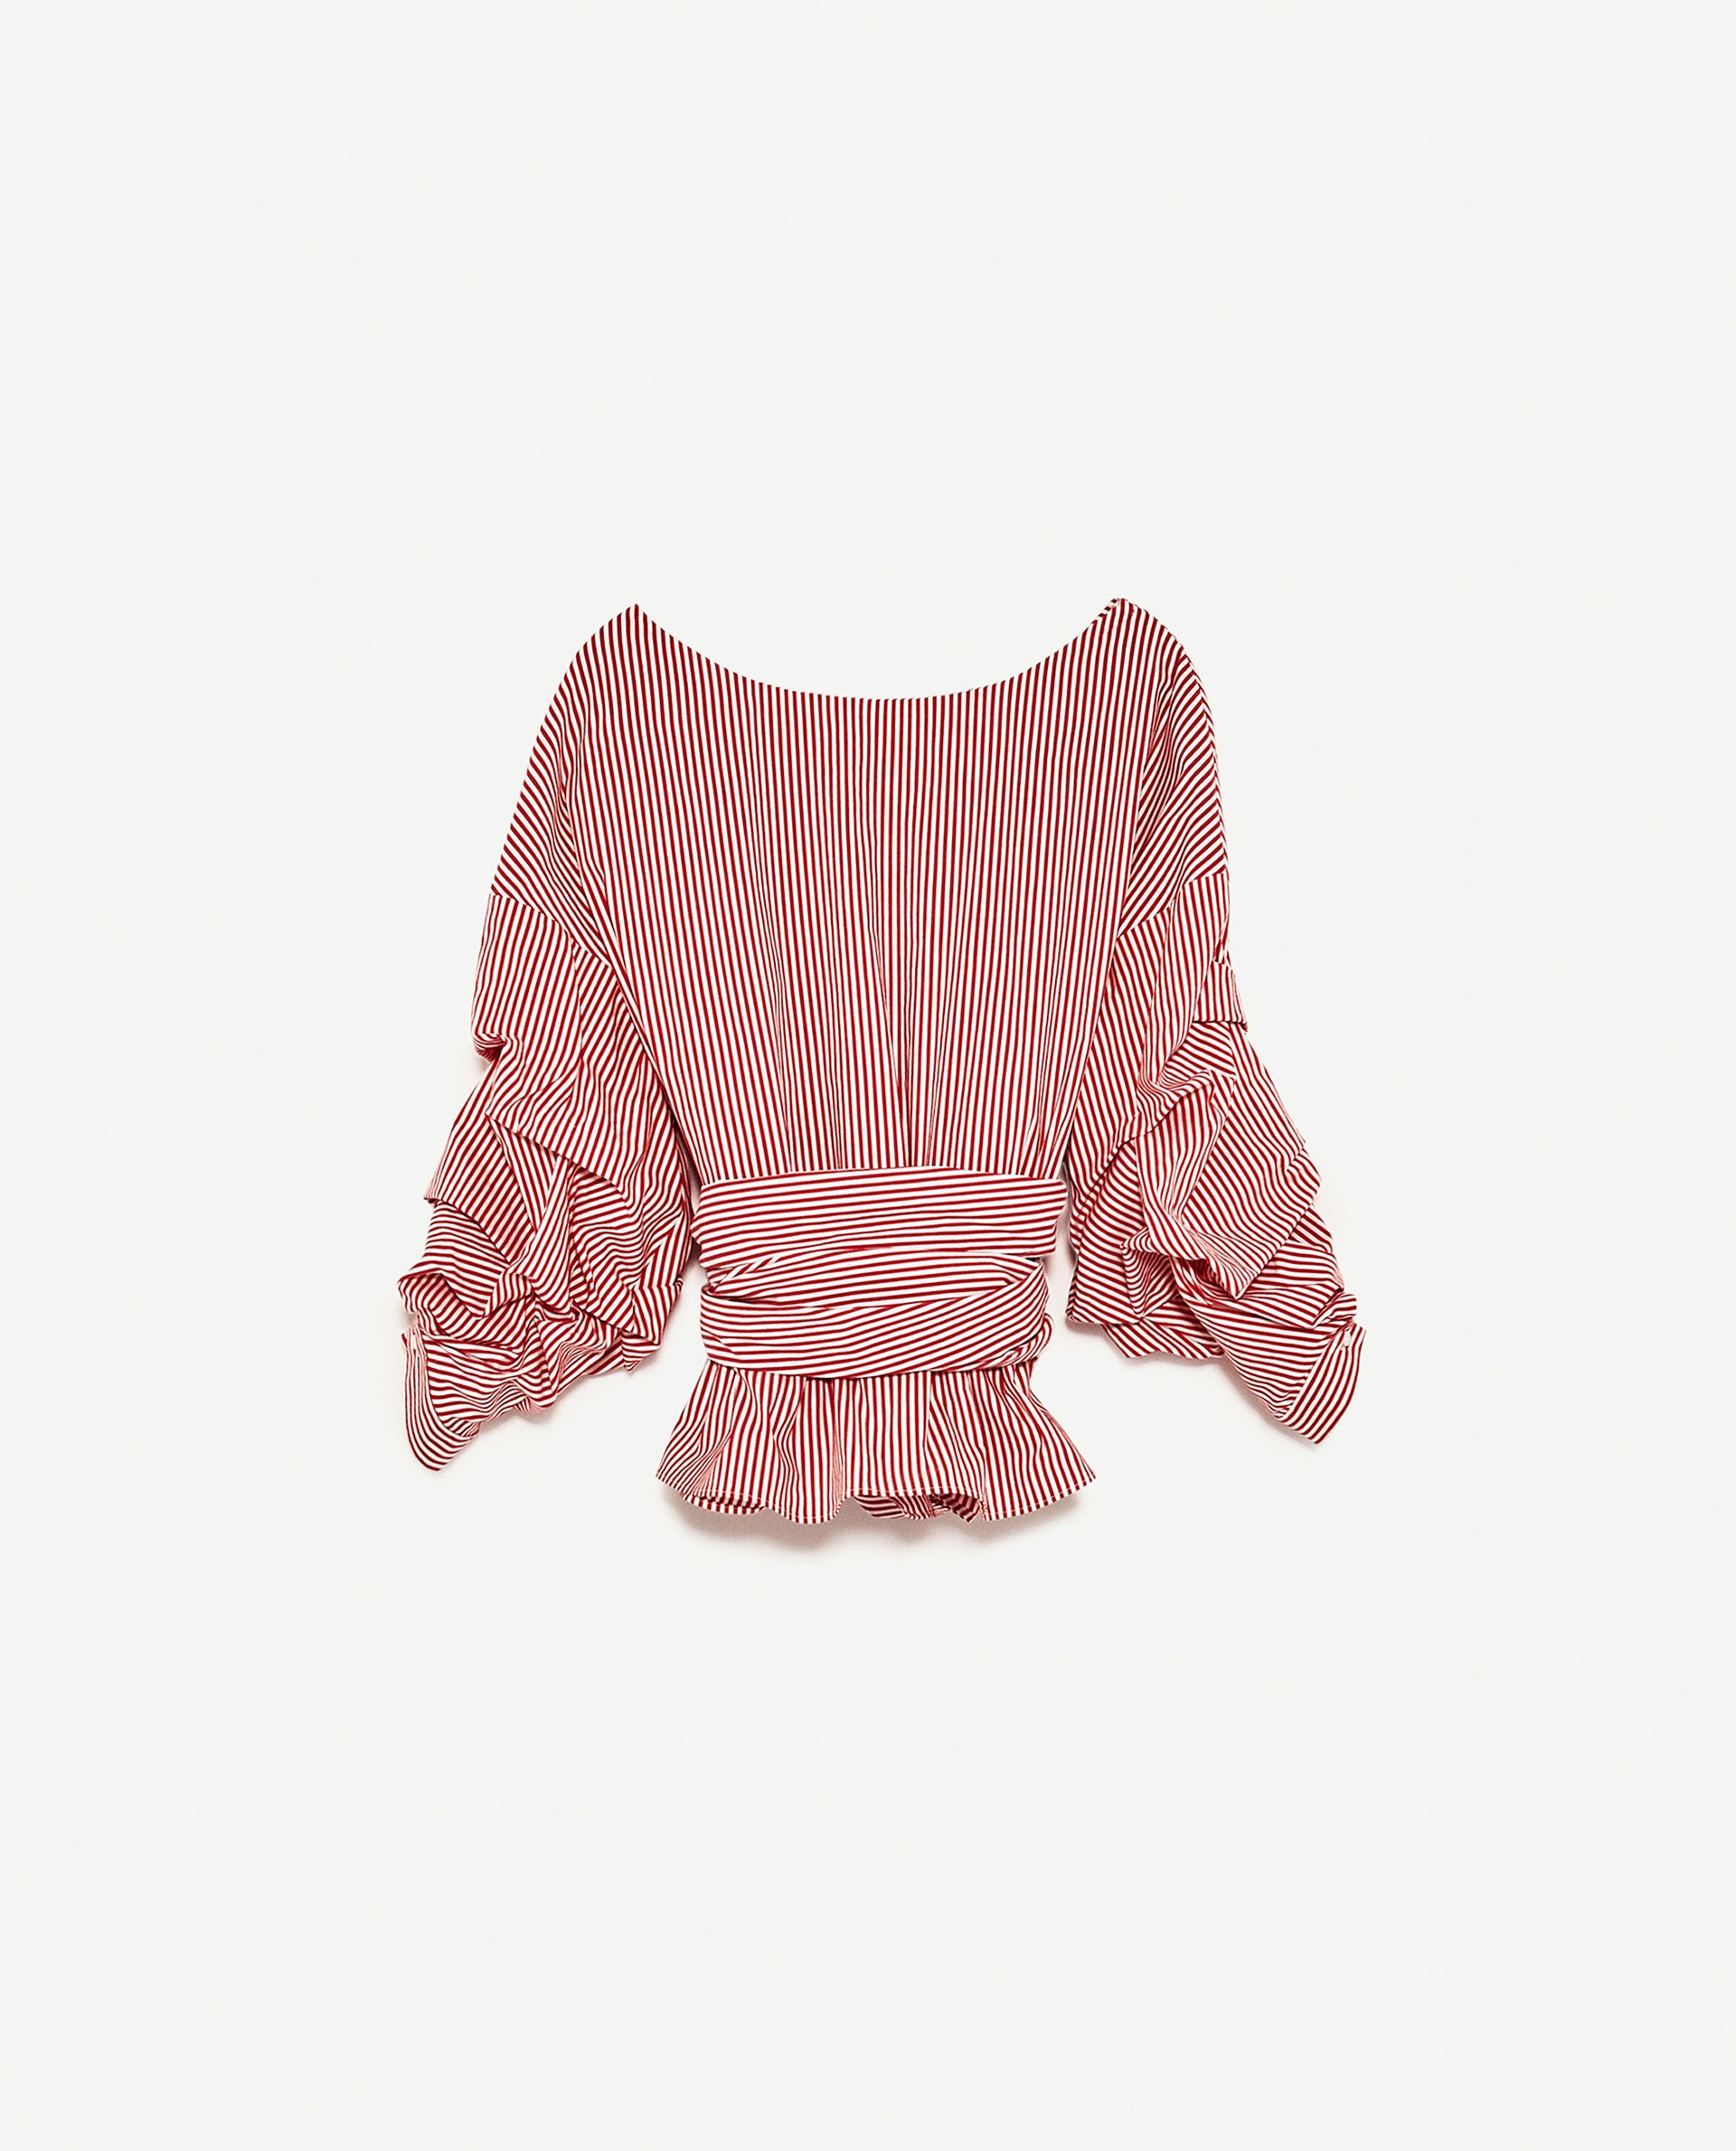 All About the Sleeves! 11 Festive Tops to Get You Excited For Spring